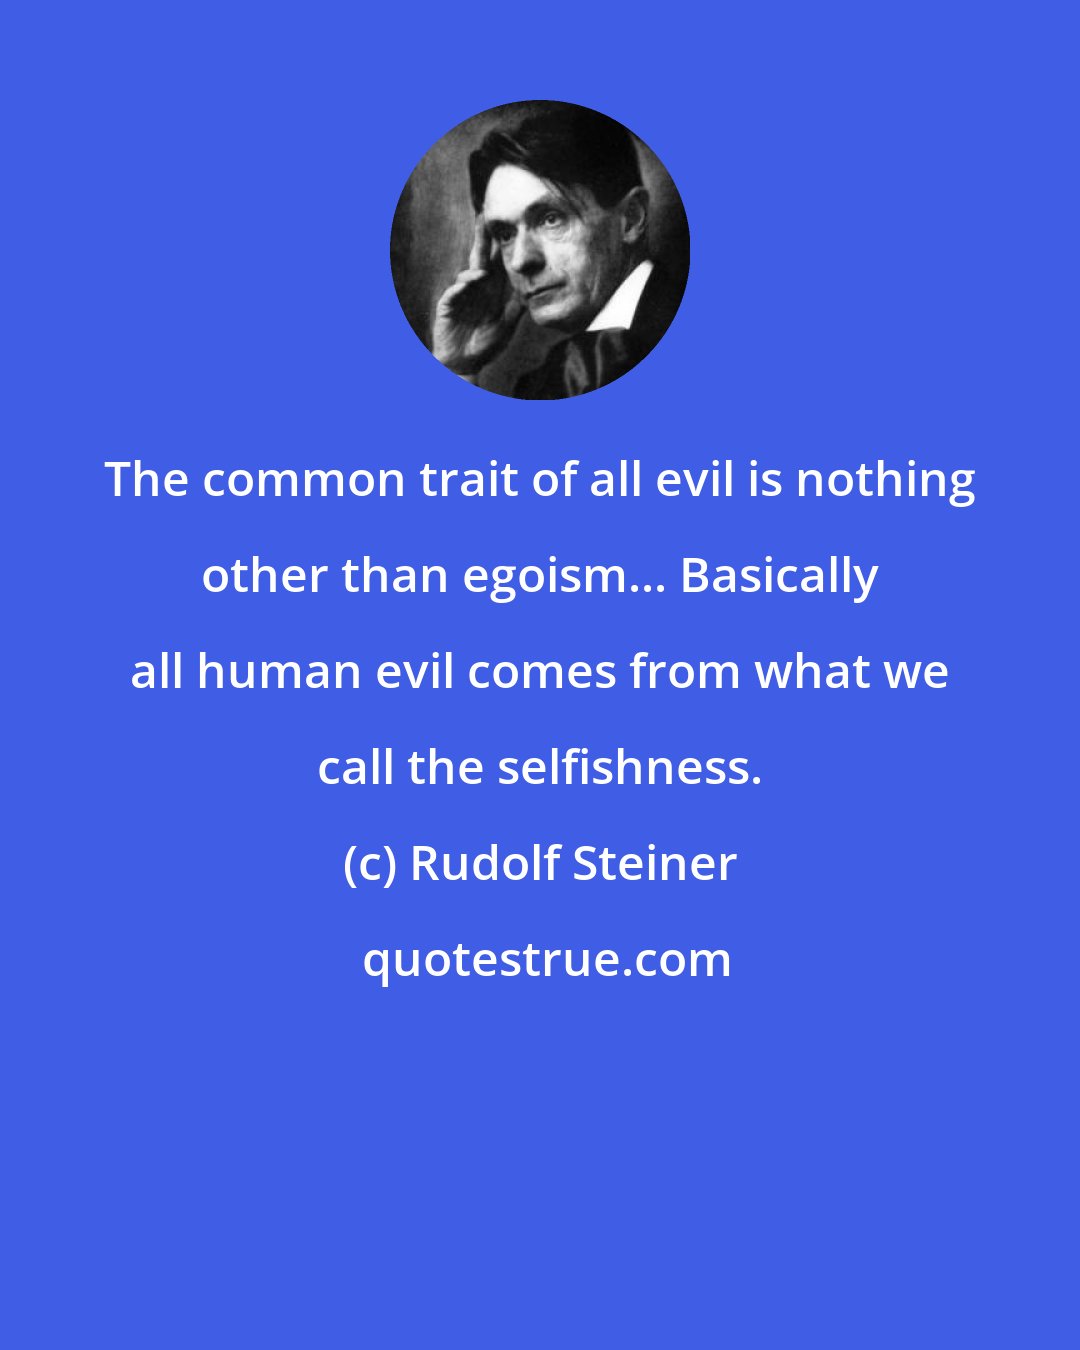 Rudolf Steiner: The common trait of all evil is nothing other than egoism... Basically all human evil comes from what we call the selfishness.